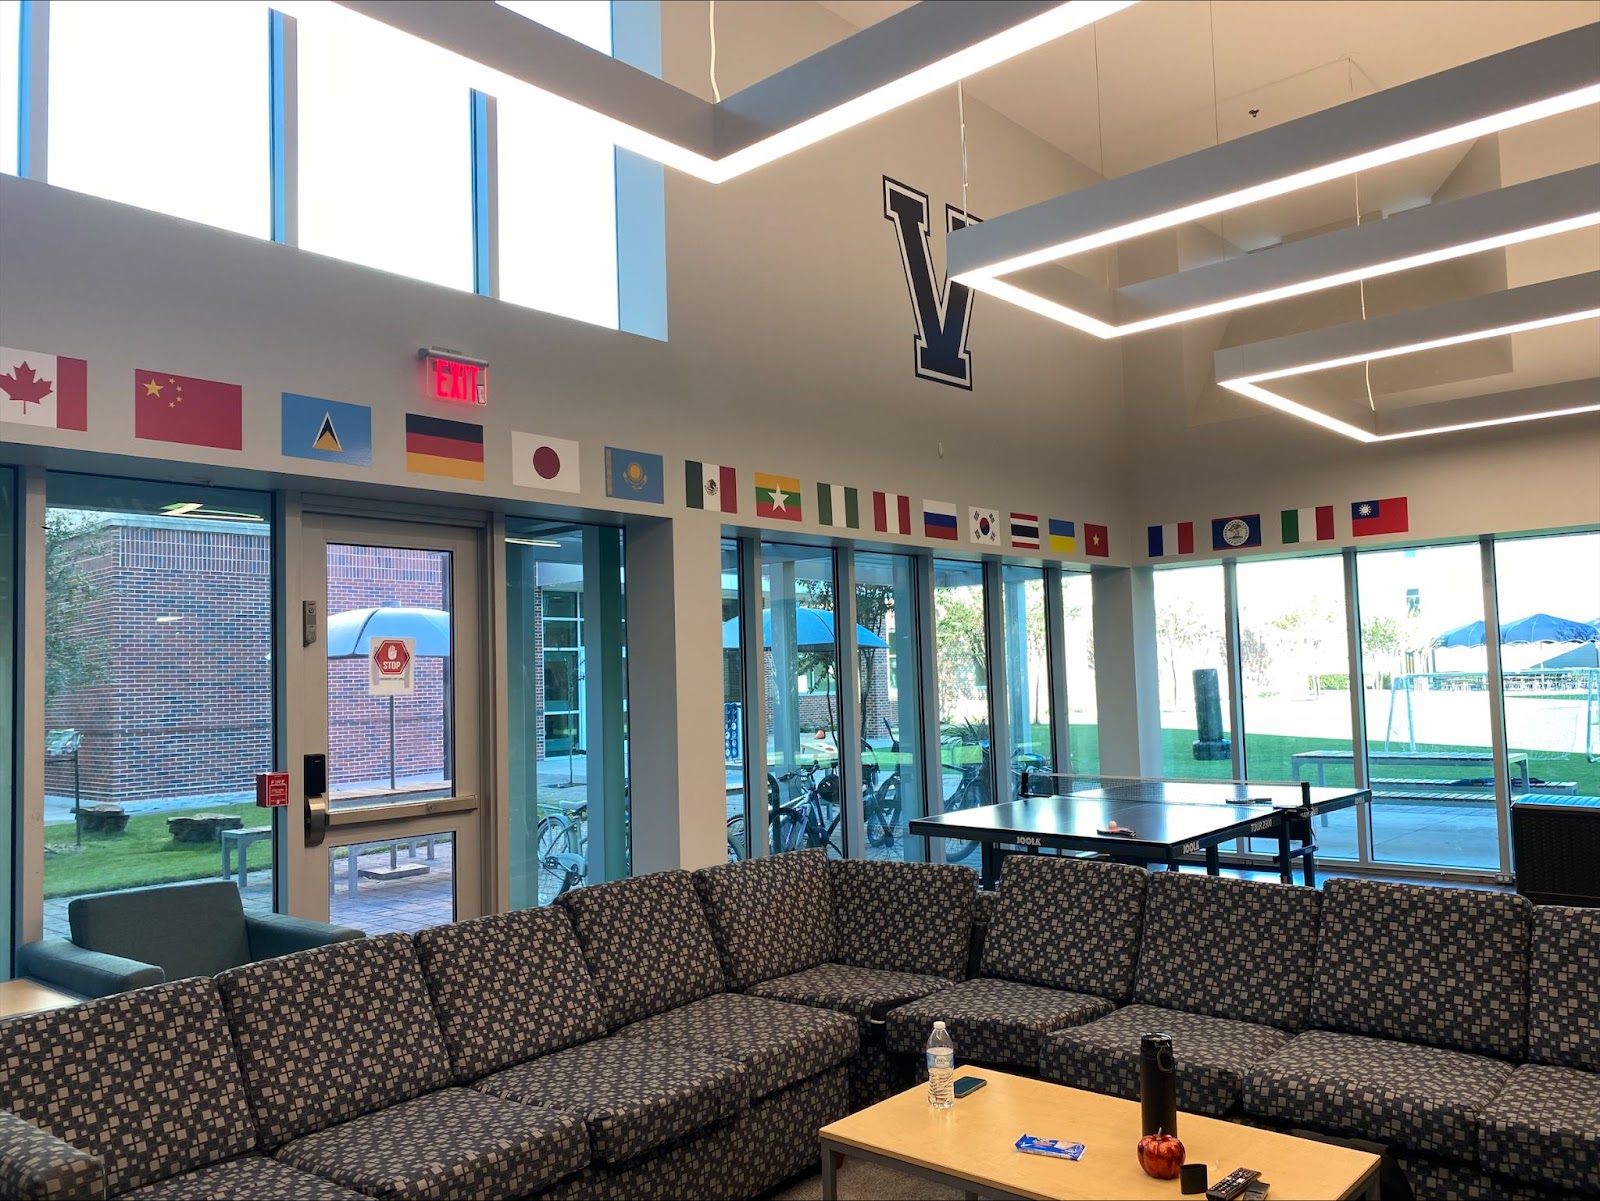 Flags represented in the Village School’s residential life common area